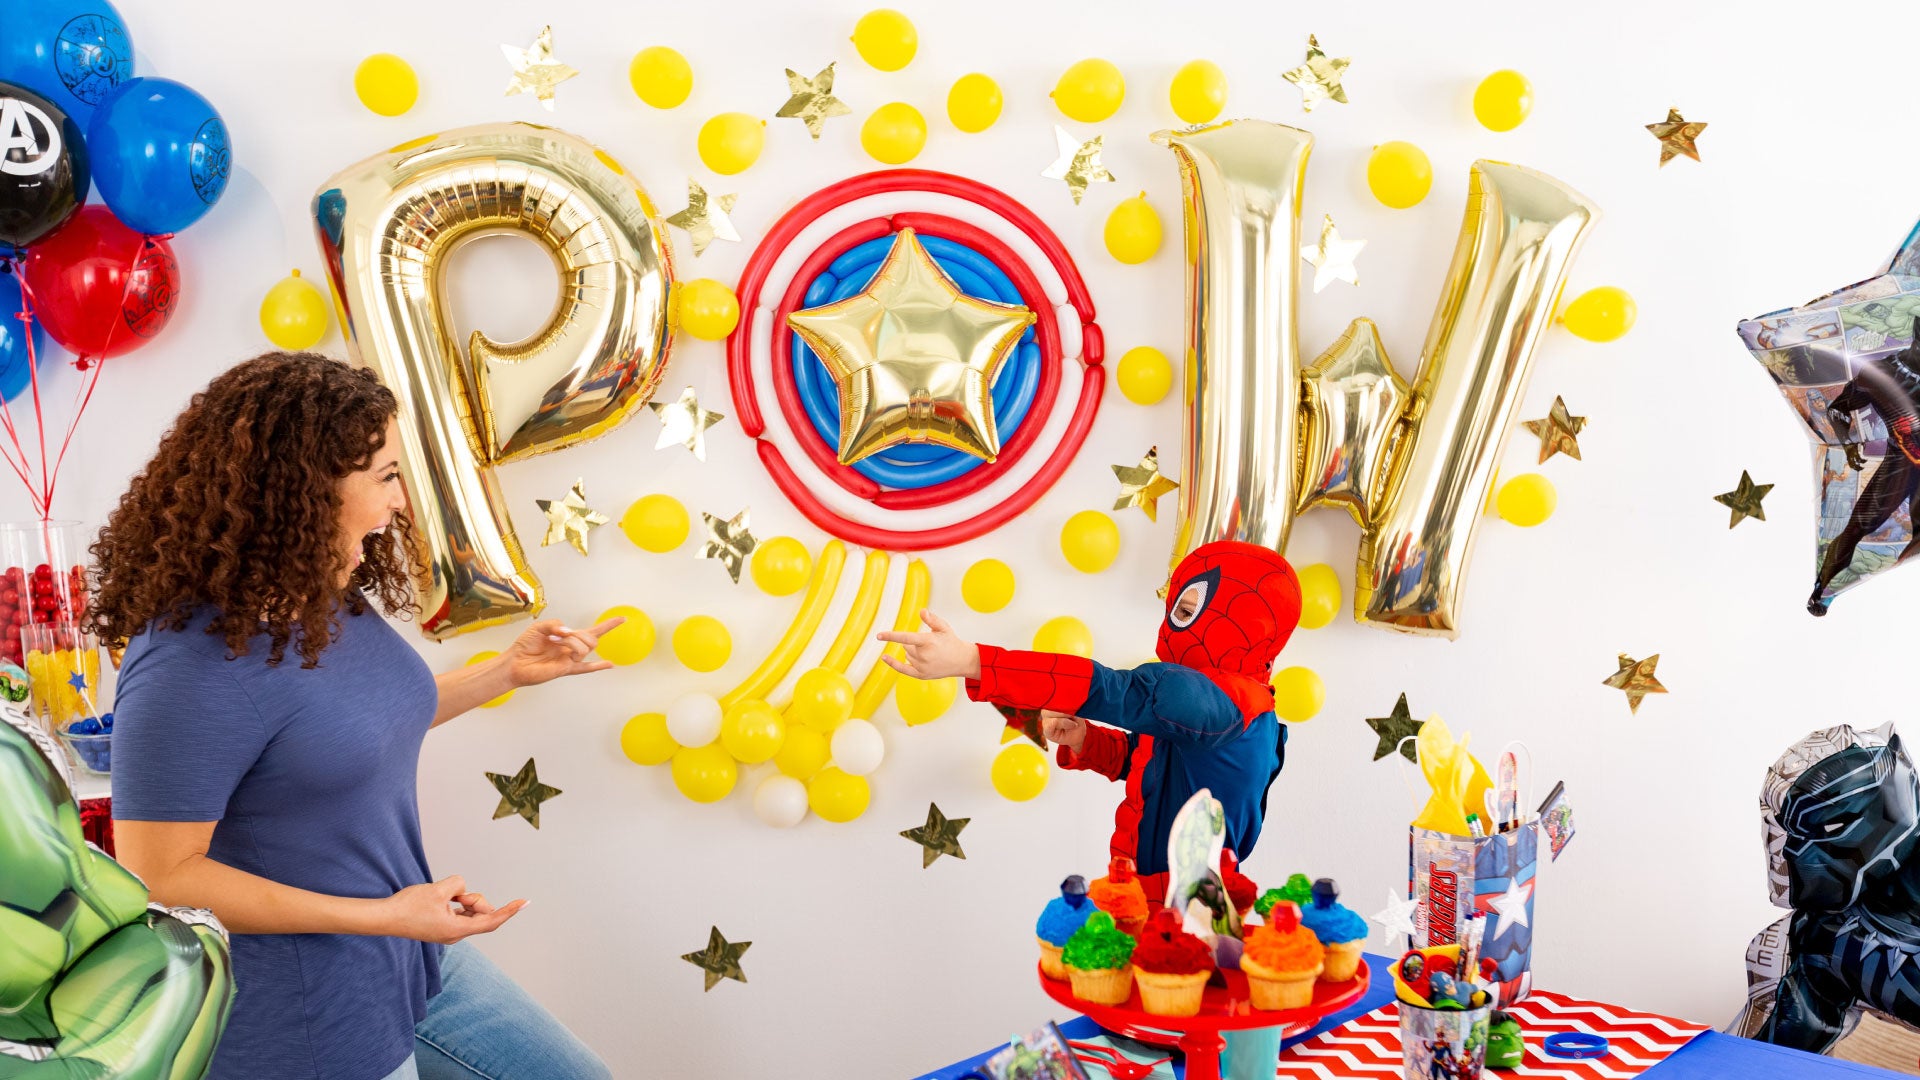 Avengers Assemble: Ultimate Avengers Birthday Party Guide